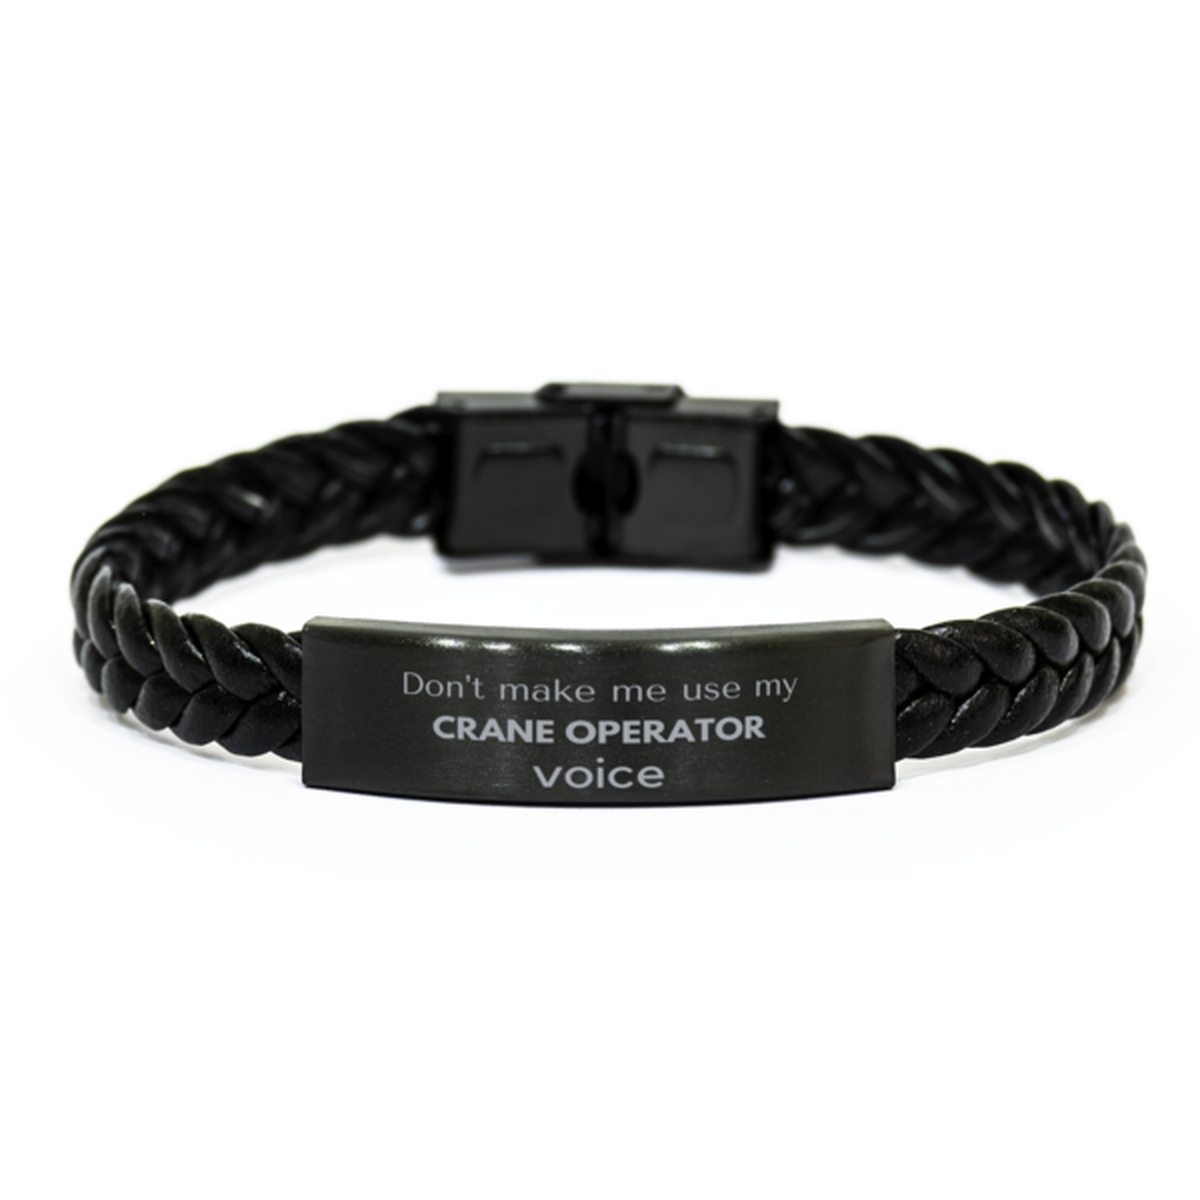 Don't make me use my Crane Operator voice, Sarcasm Crane Operator Gifts, Christmas Crane Operator Braided Leather Bracelet Birthday Unique Gifts For Crane Operator Coworkers, Men, Women, Colleague, Friends